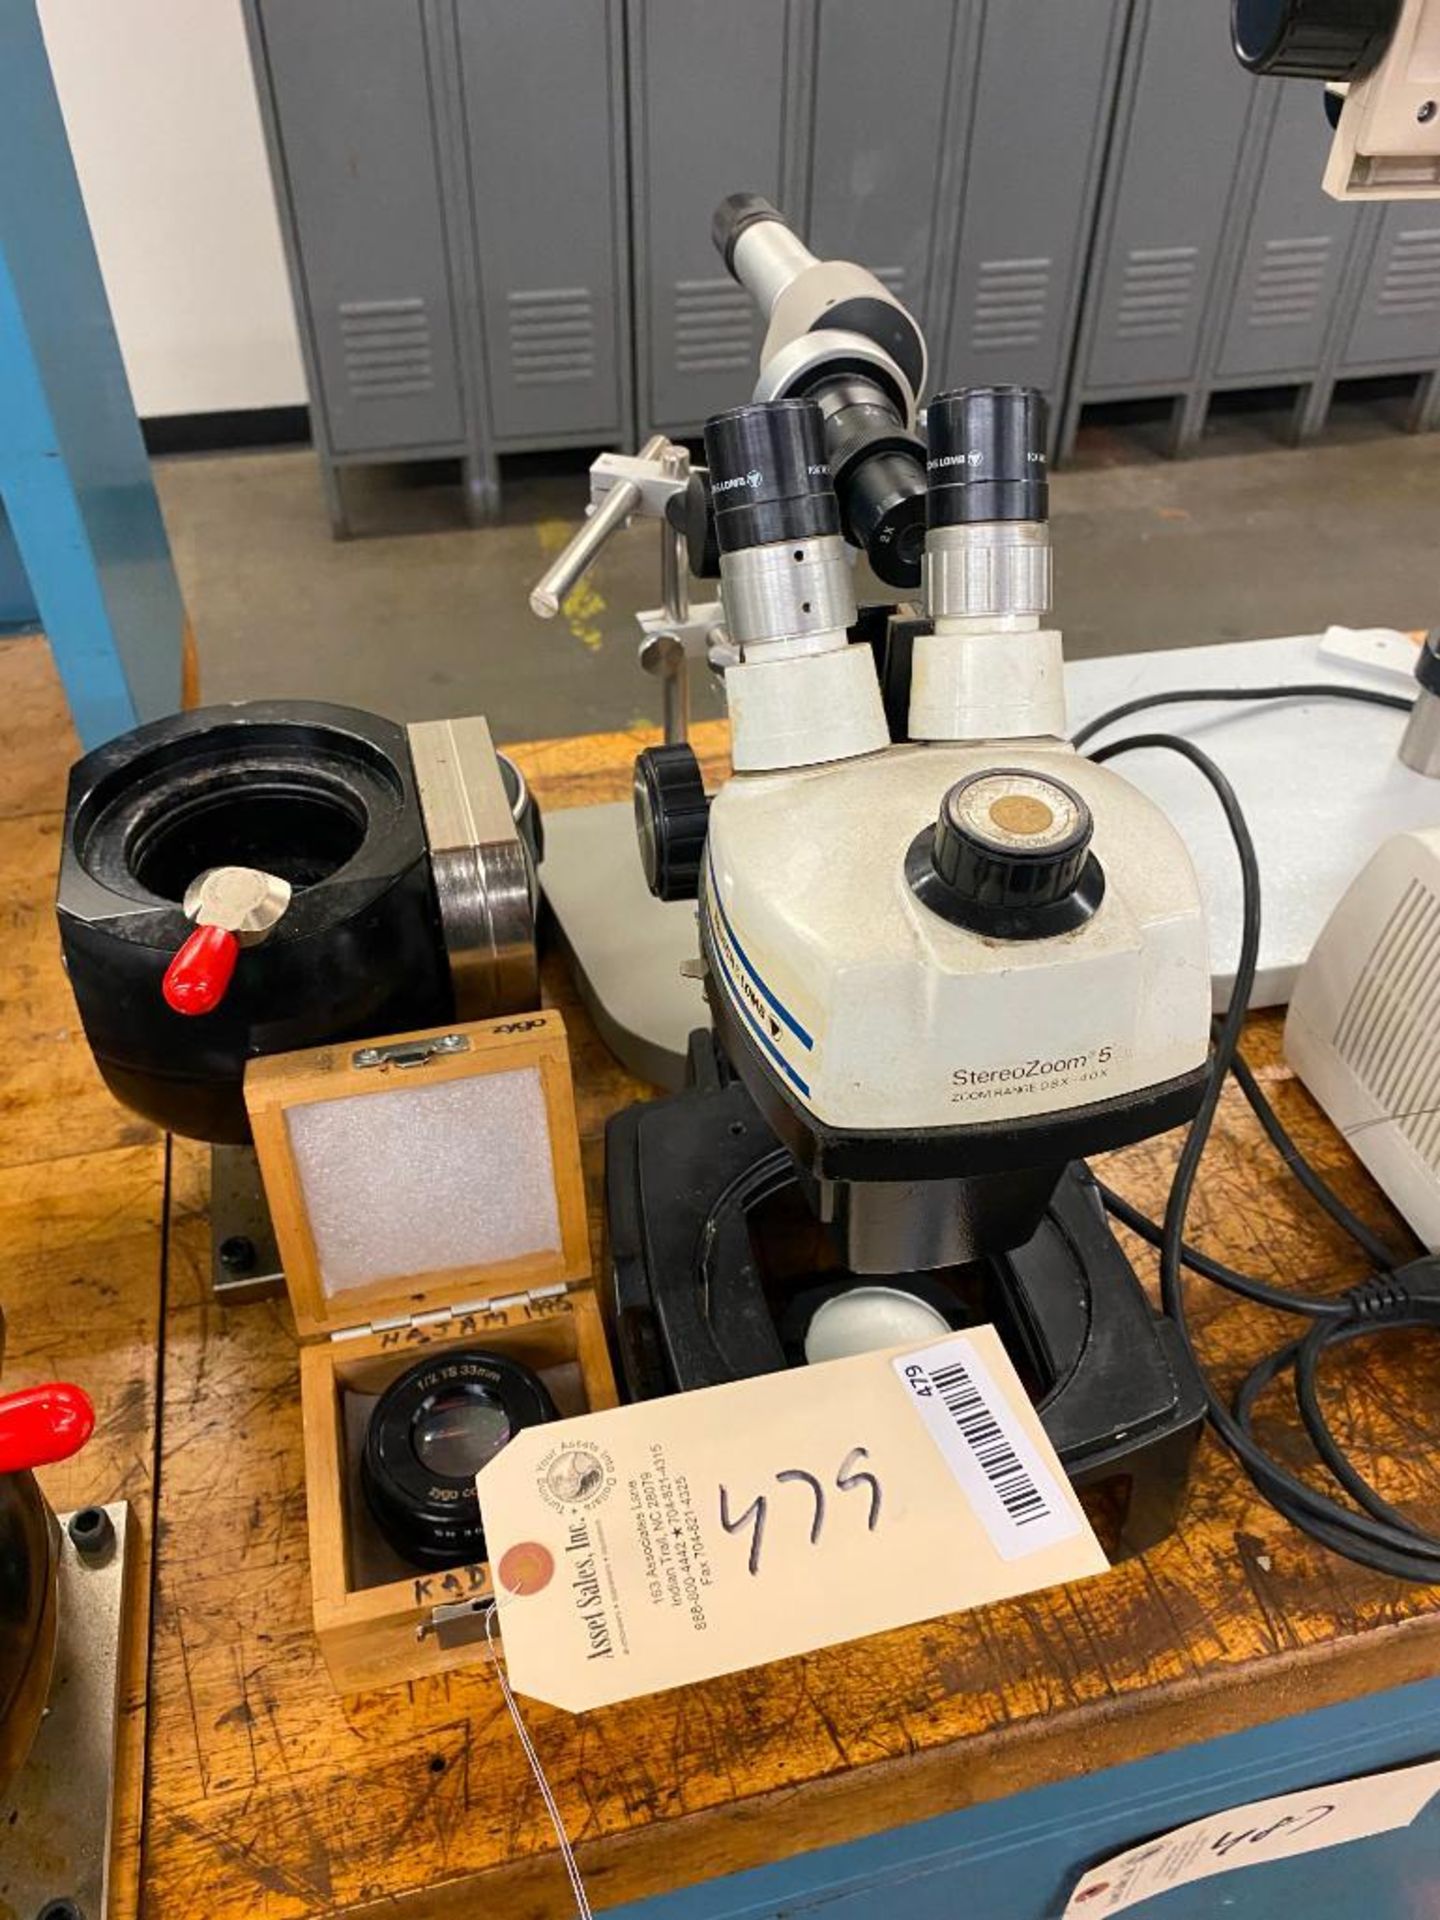 Bausch & Lomb Stereozoom 5 Microscope